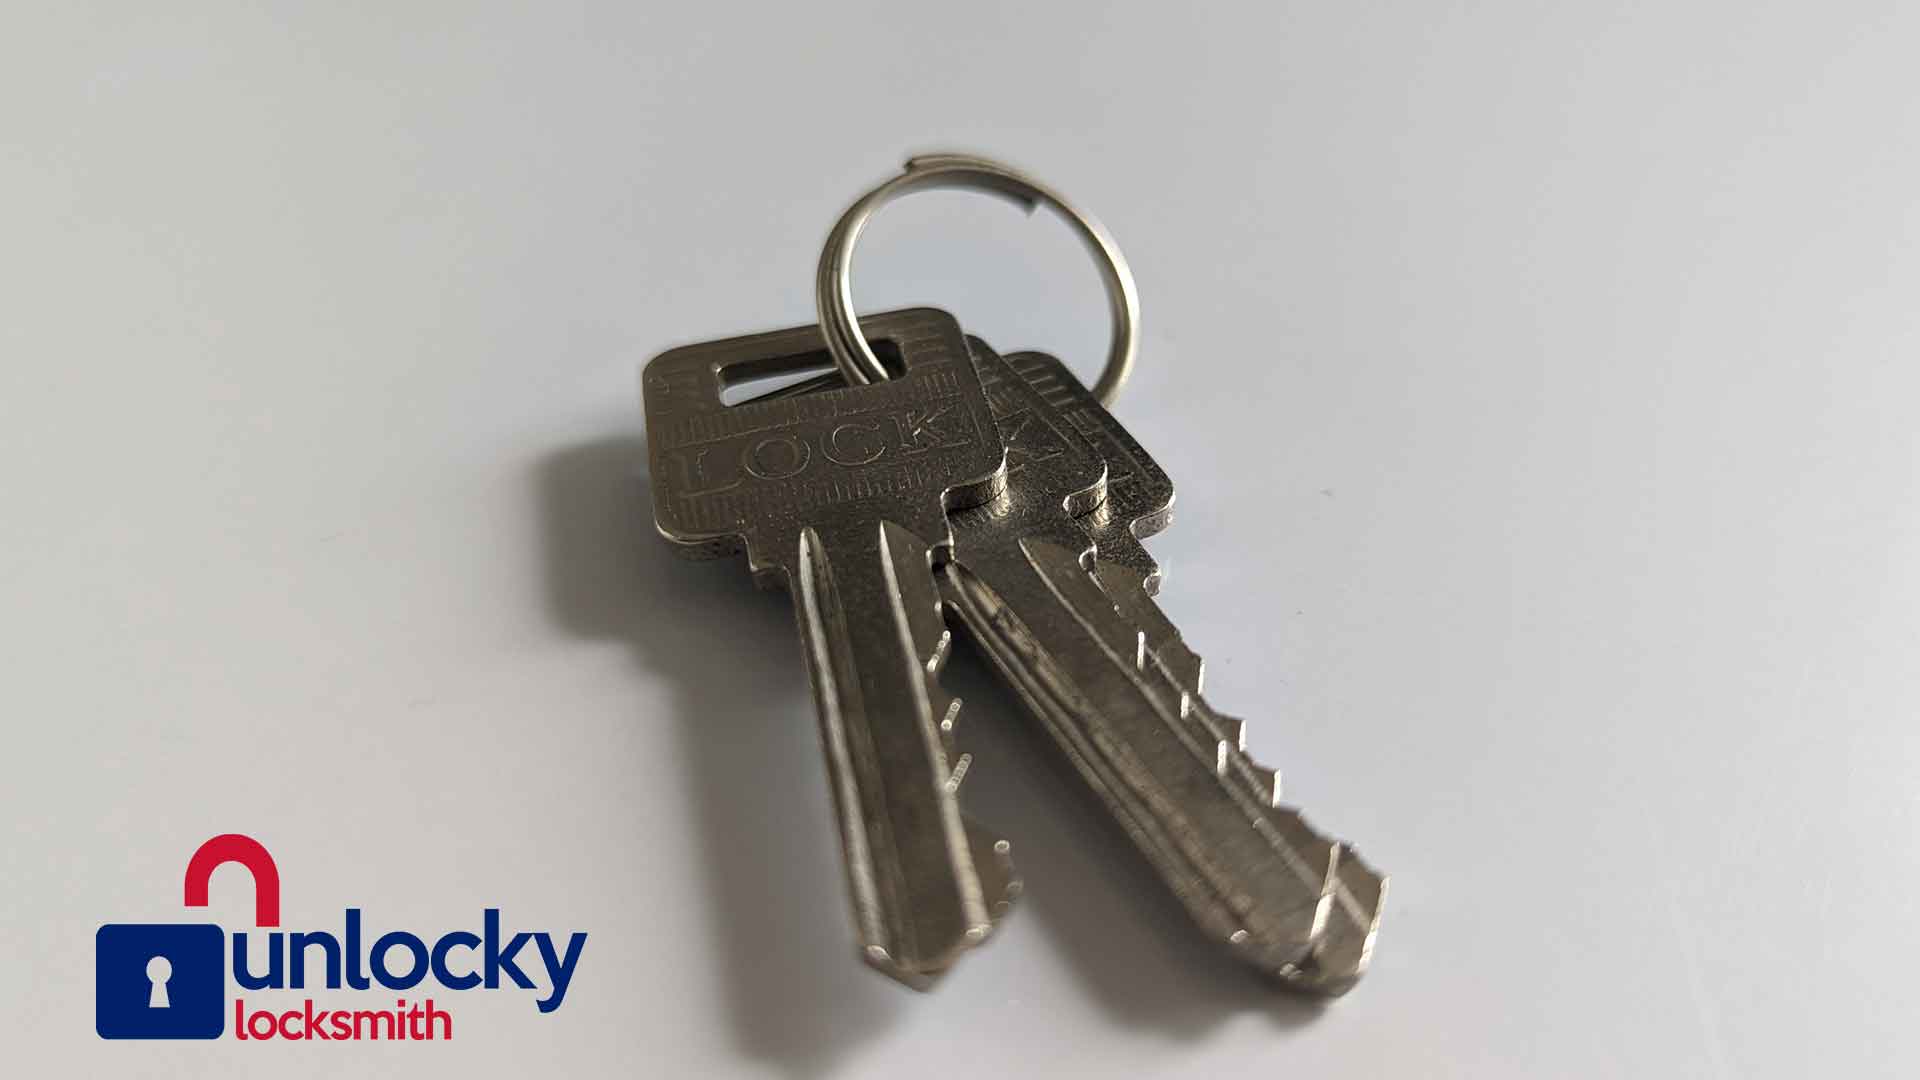 Unlocky - LOCKED OUT OF YOUR HOUSE?